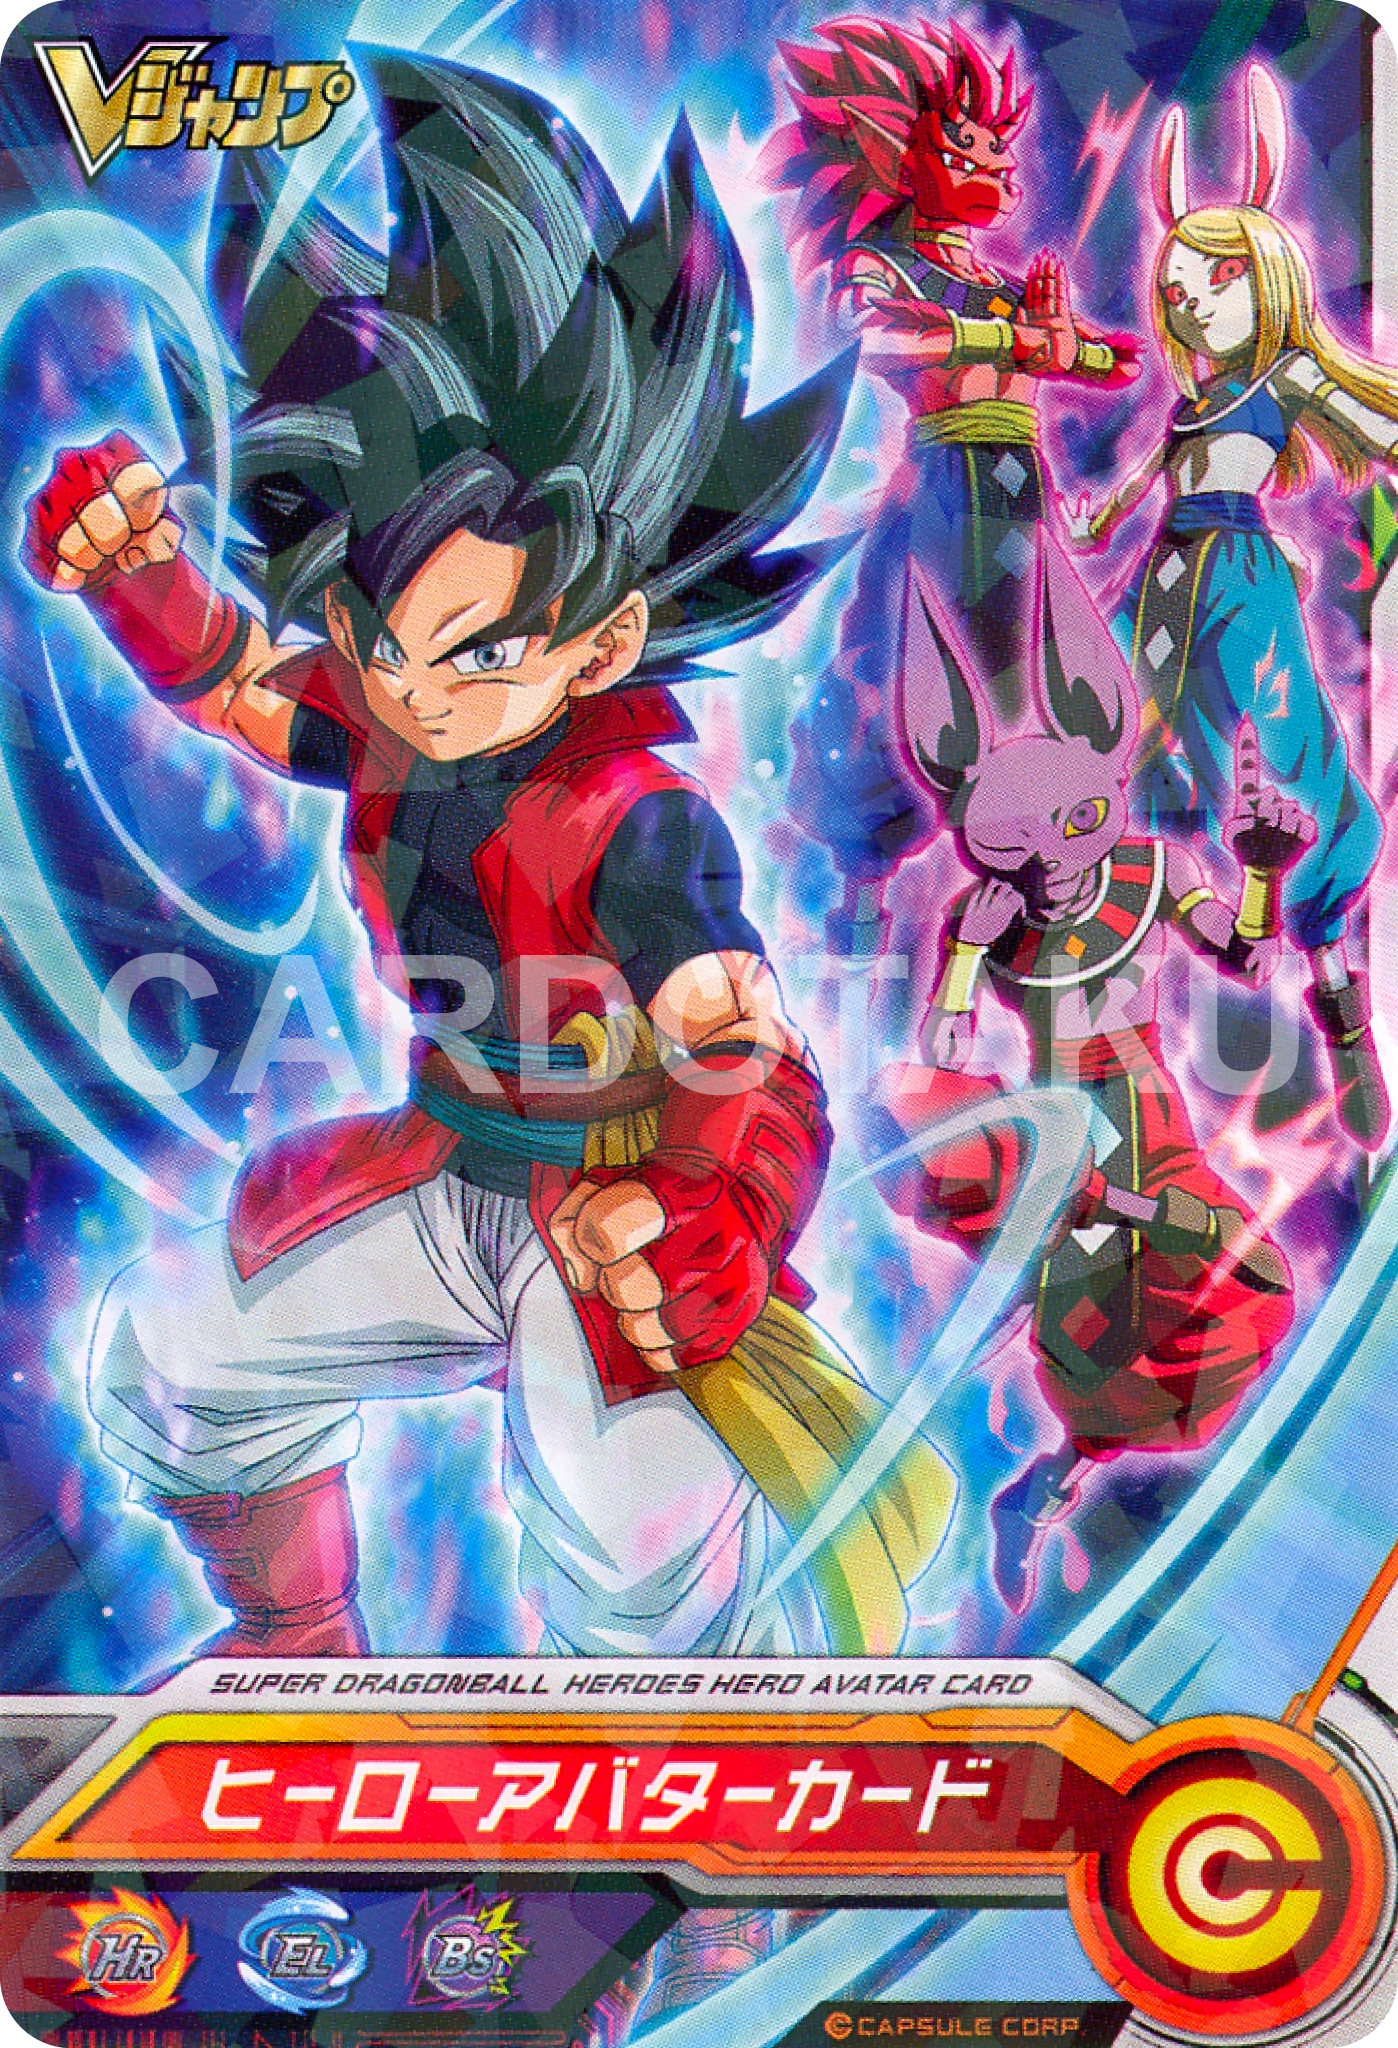 SUPER DRAGON BALL HEROES BMPJ-18 HERO AVATAR  Promotional card sold with the January 2021 issue of V Jump magazine released November 21 2020.  HERO AVATAR